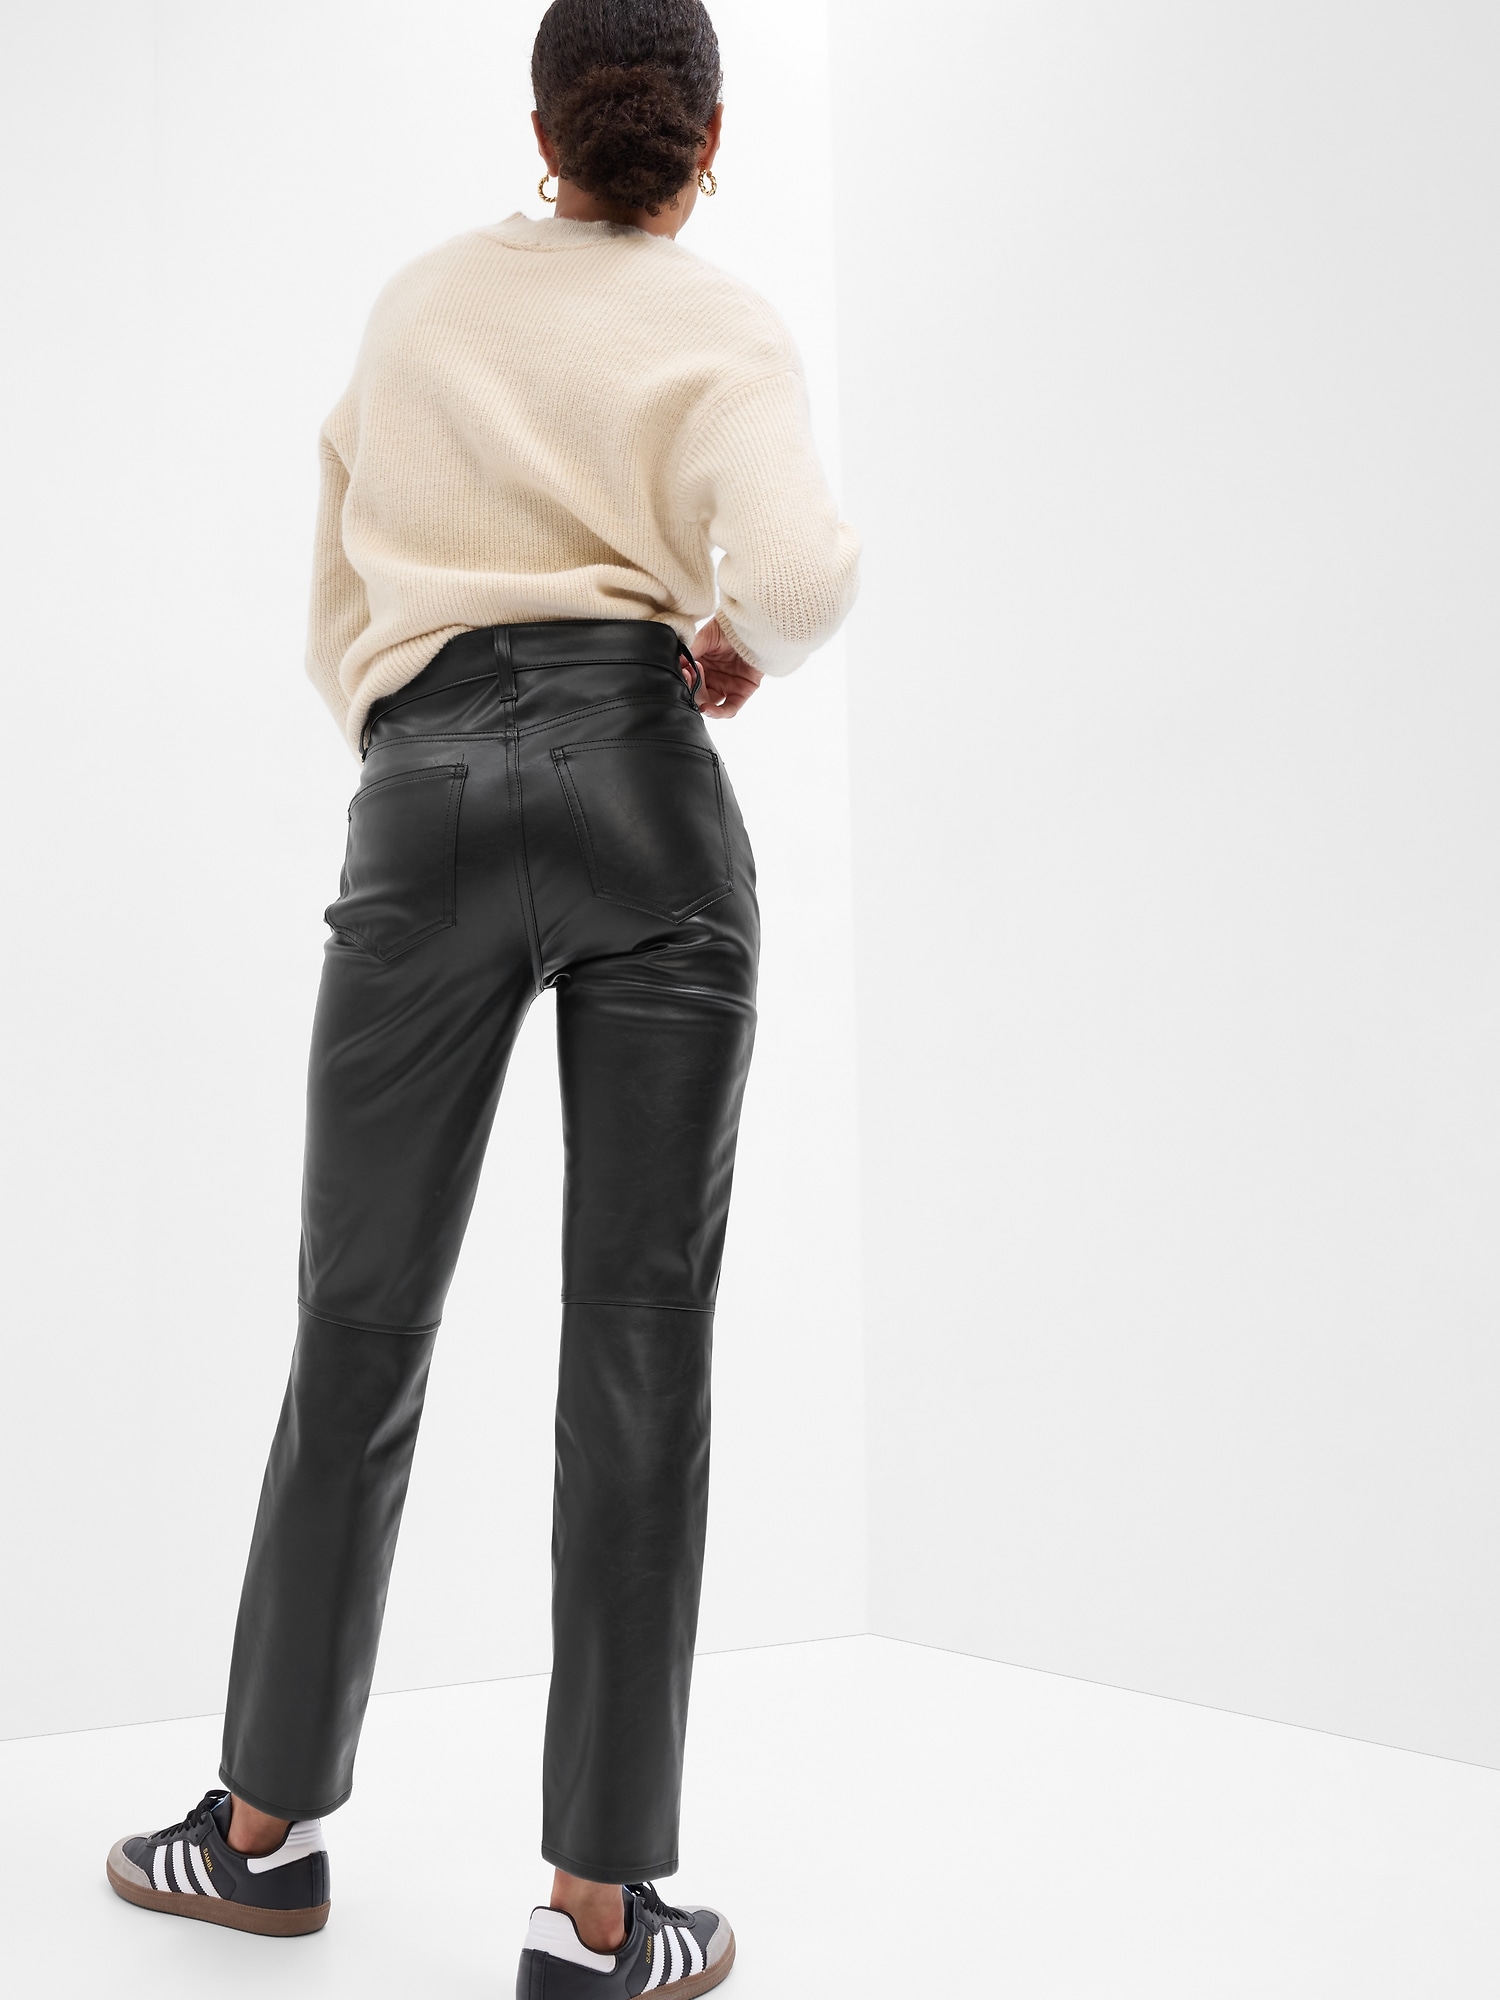 Buy Gap High Waisted Slim Faux-Leather Trousers from the Gap online shop